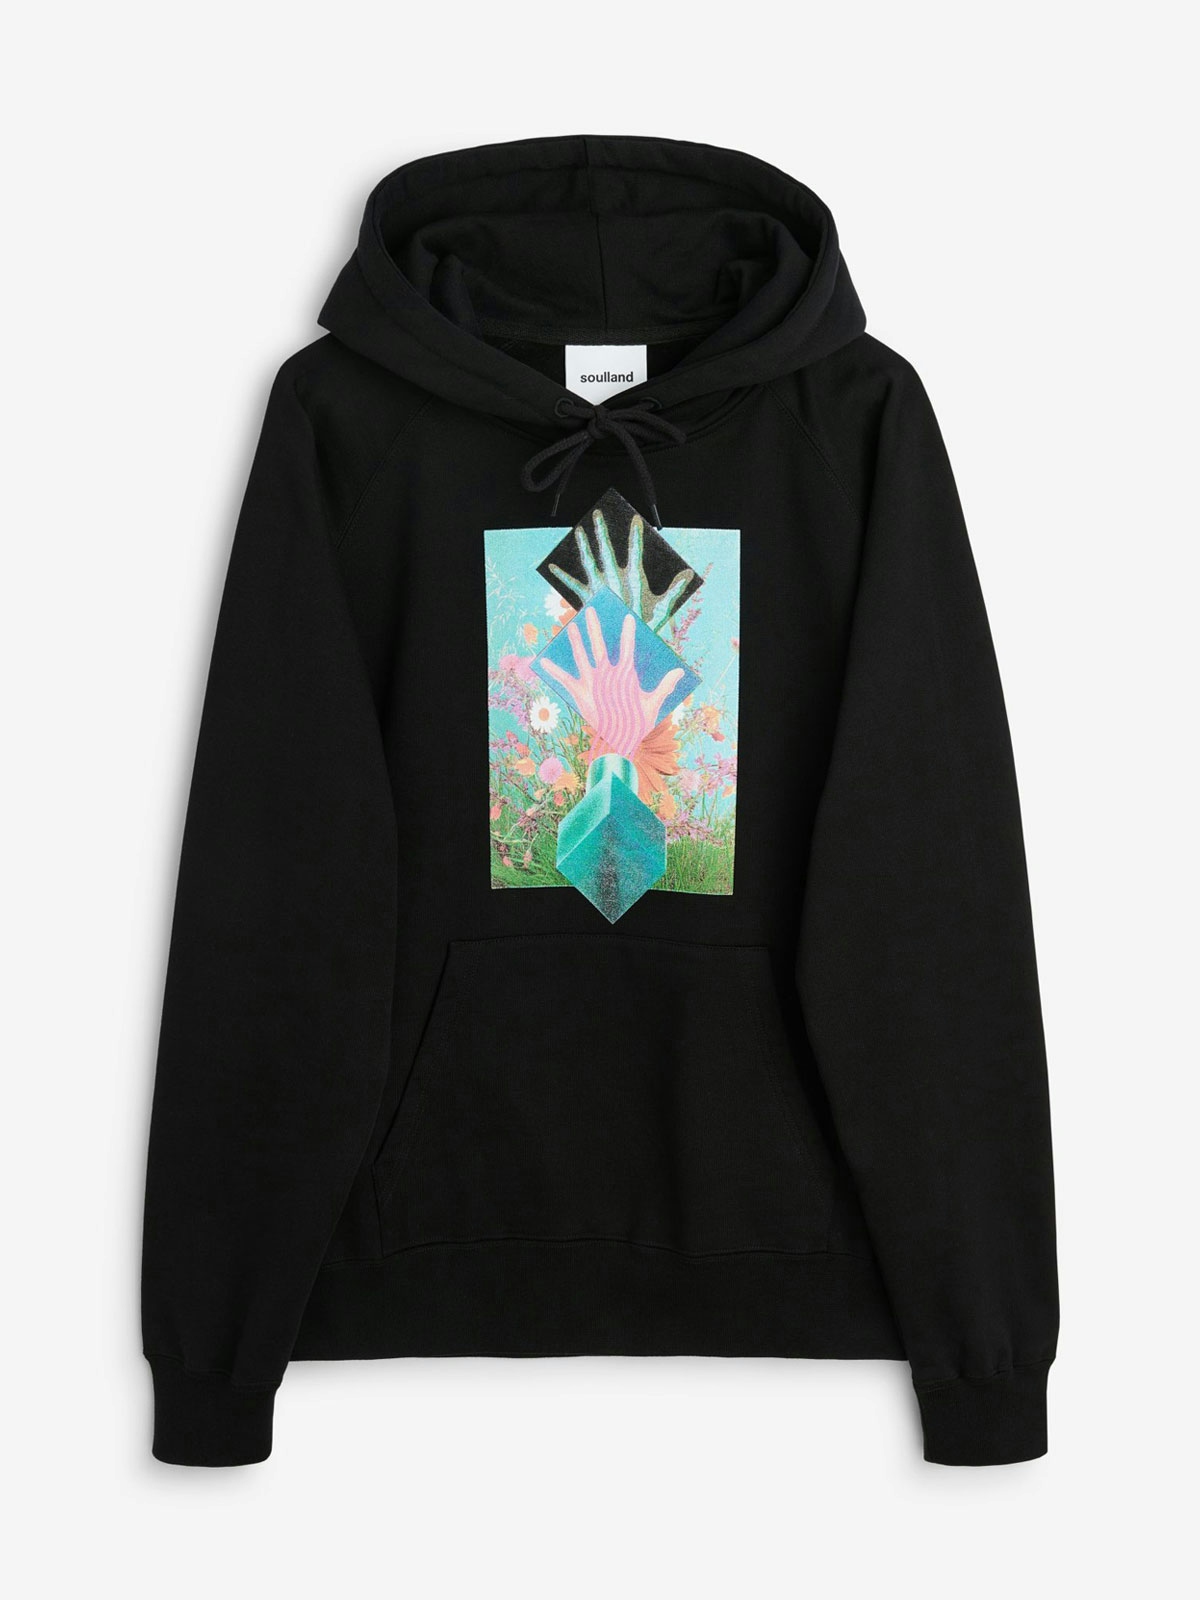 Poetic Collective Soulland x Poetic Collective Hoodie Black 1